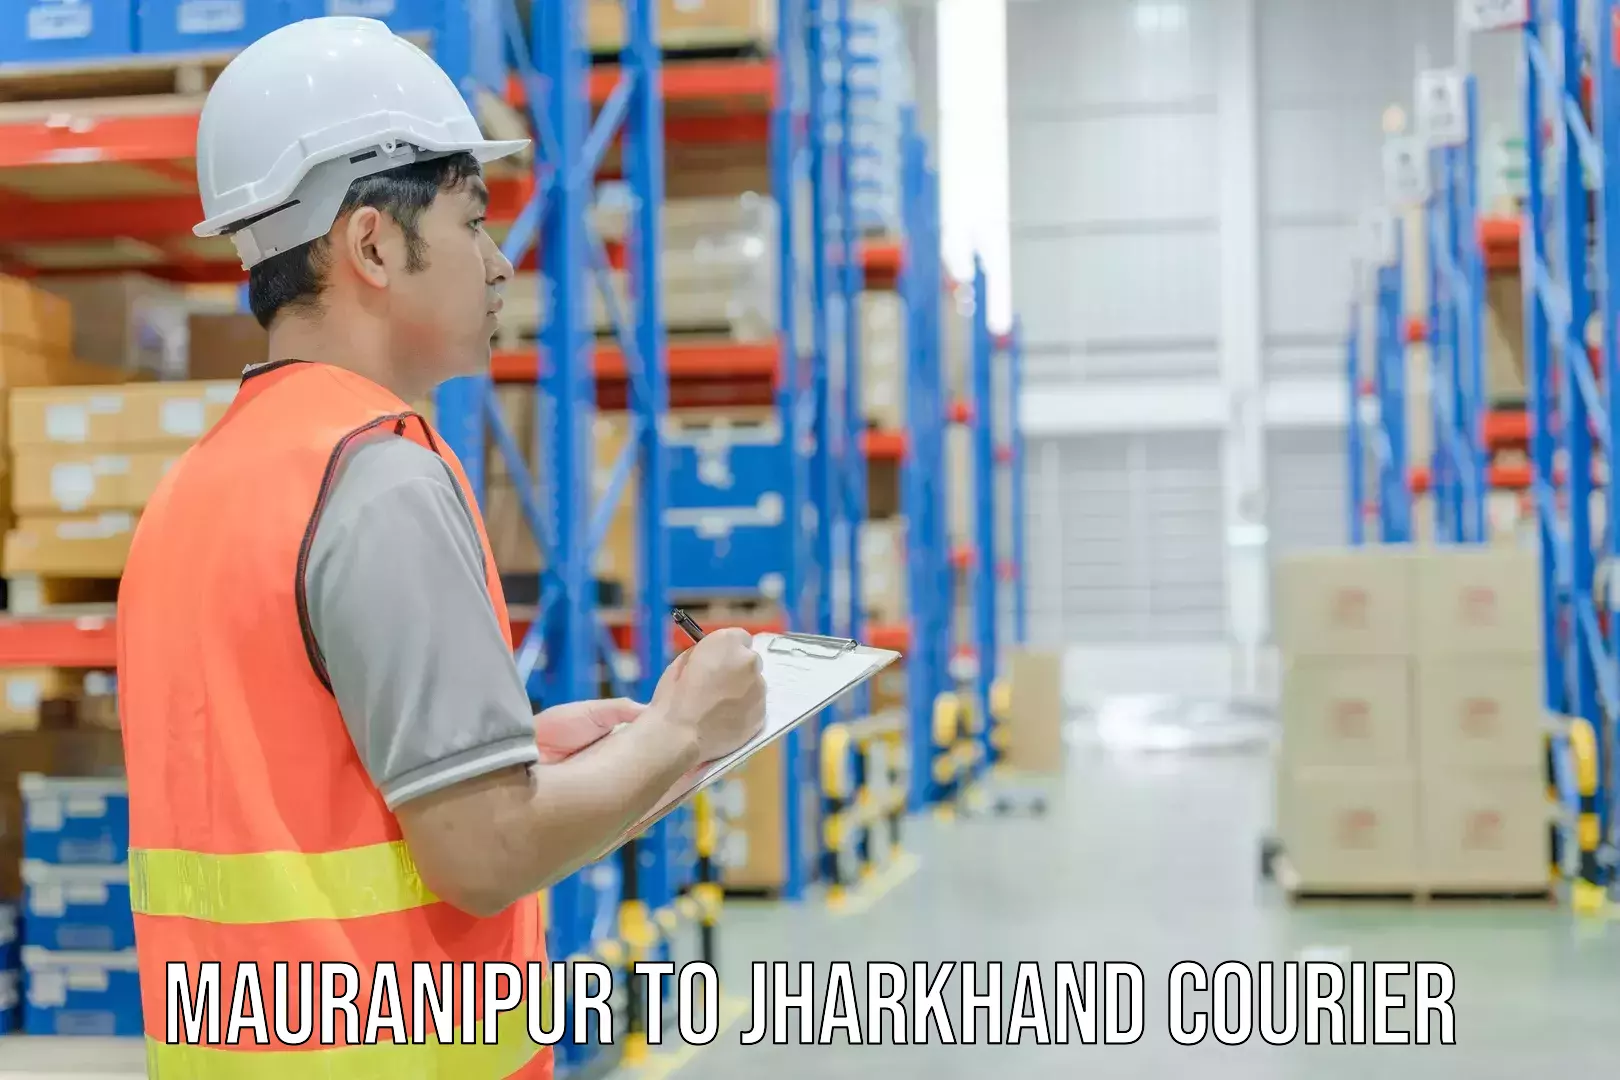 Special handling courier Mauranipur to East Singhbhum